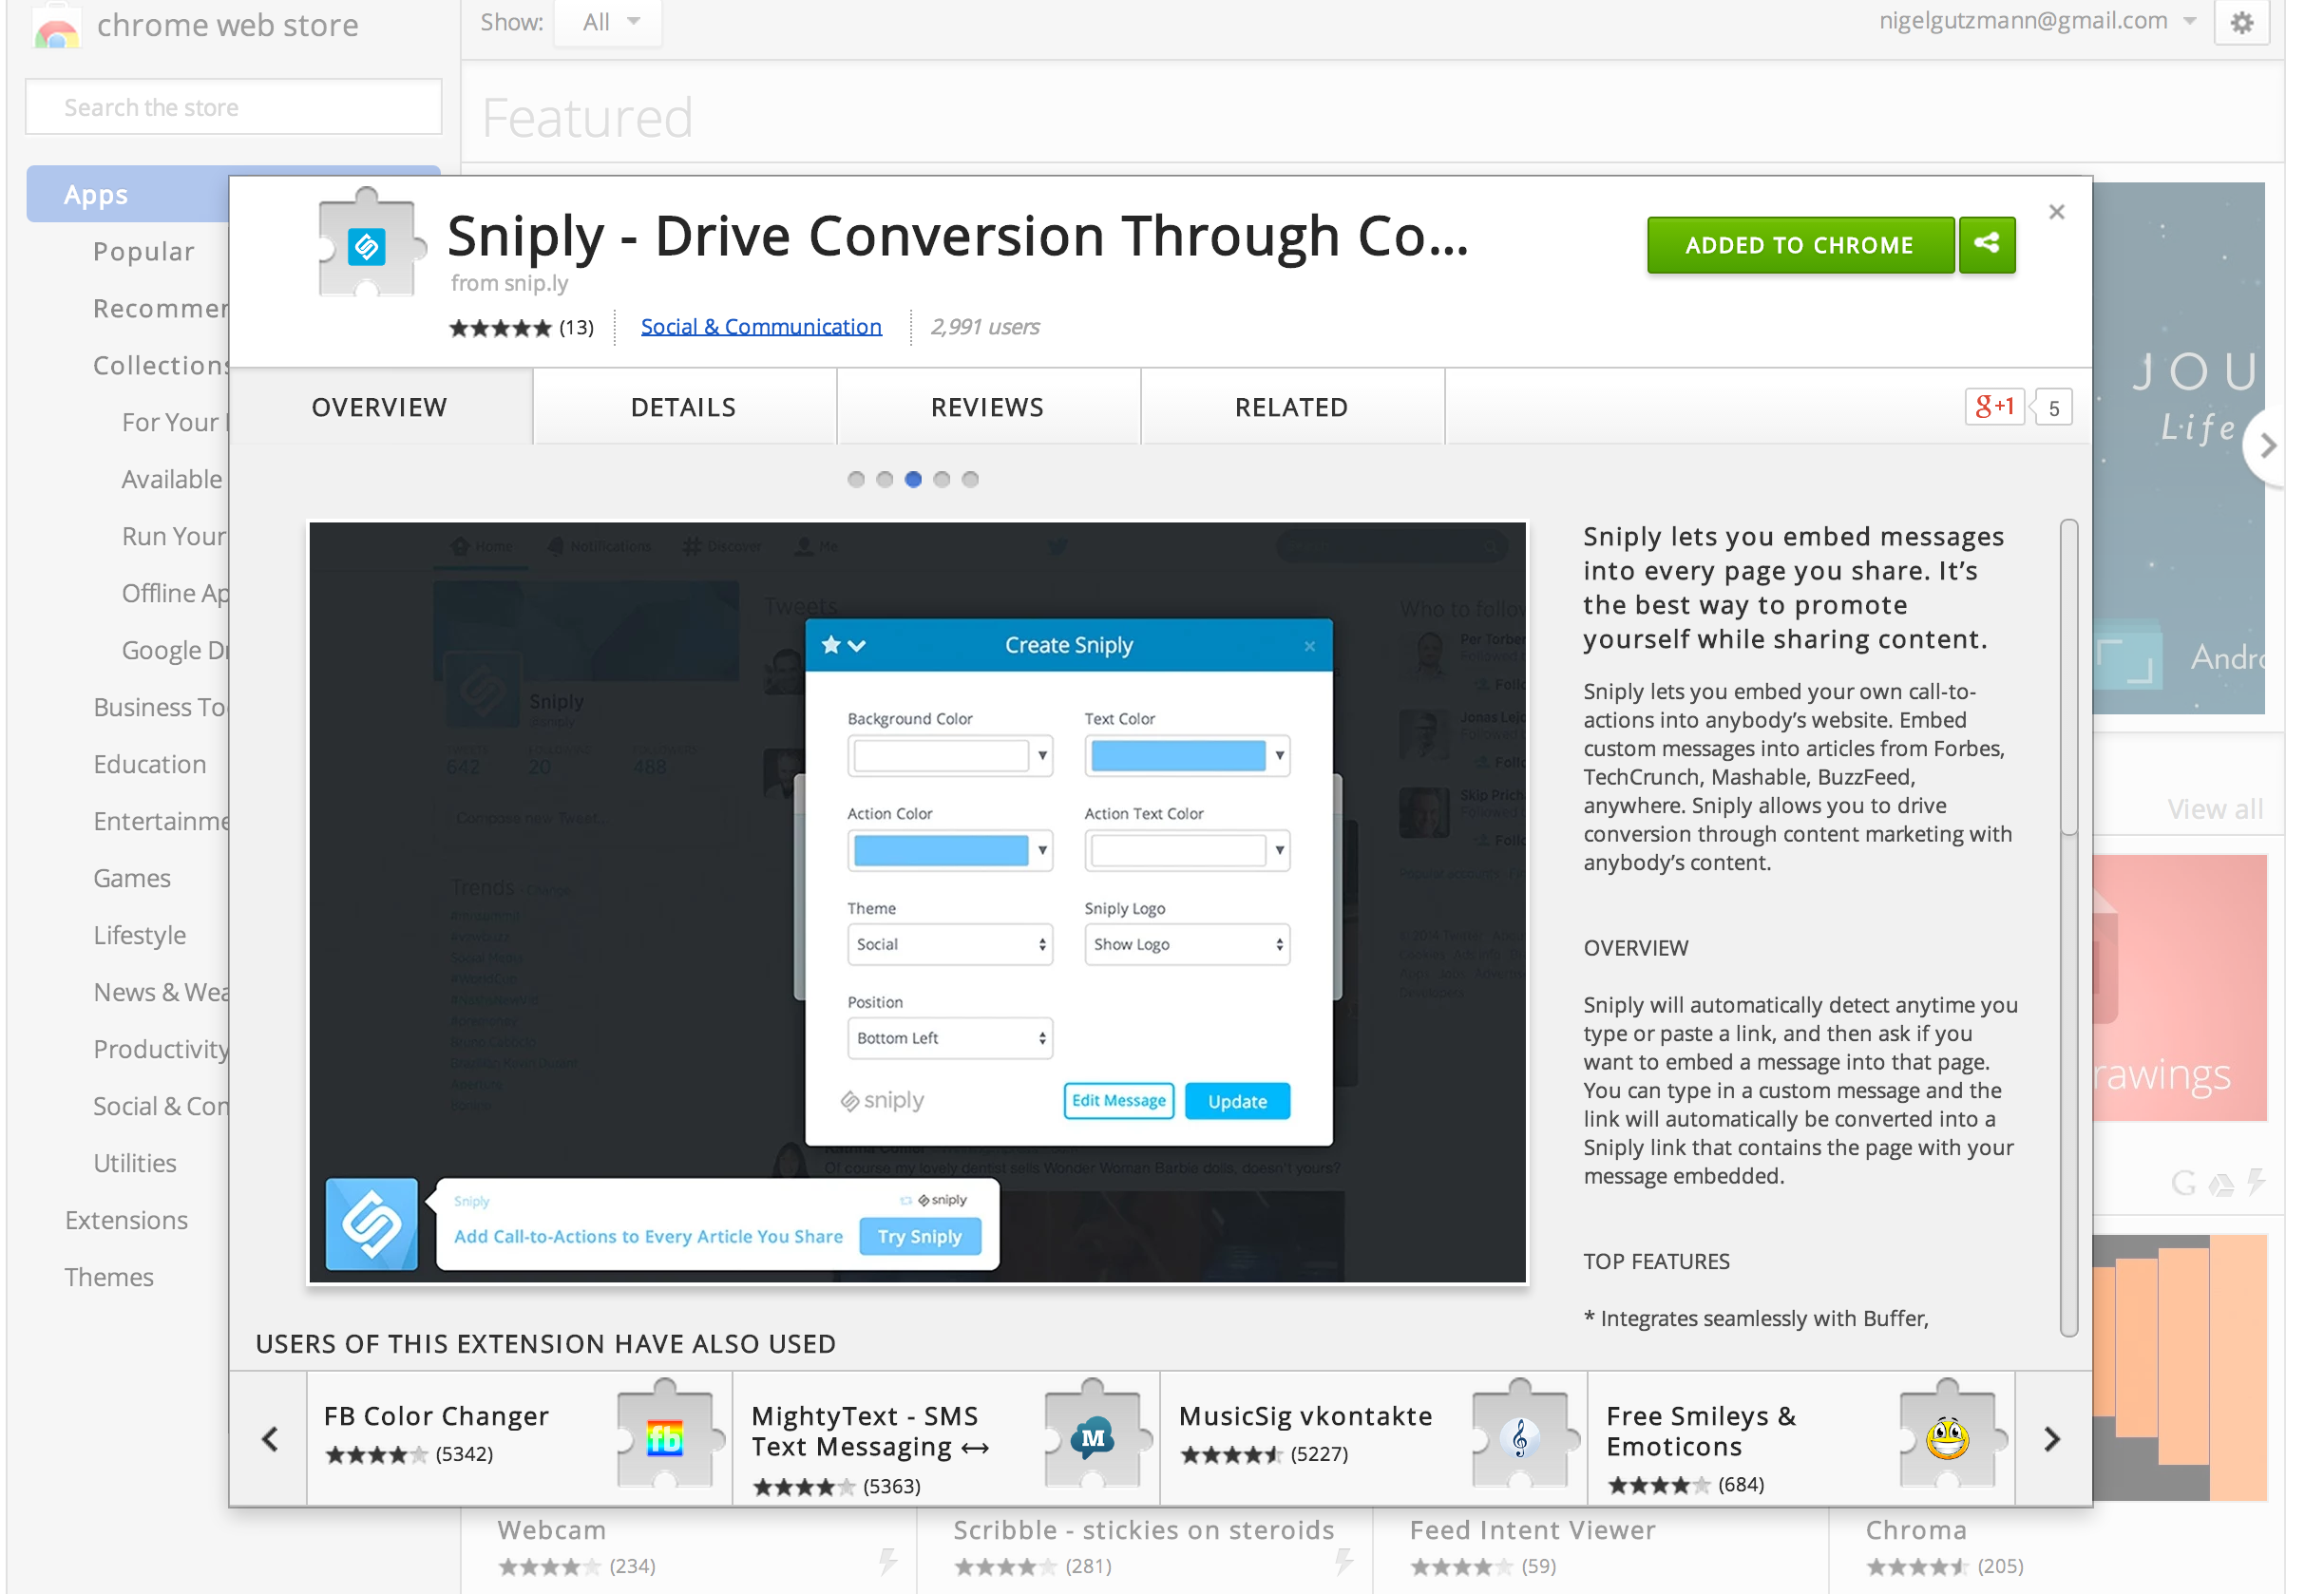 sniply chrome extensions for digital marketers